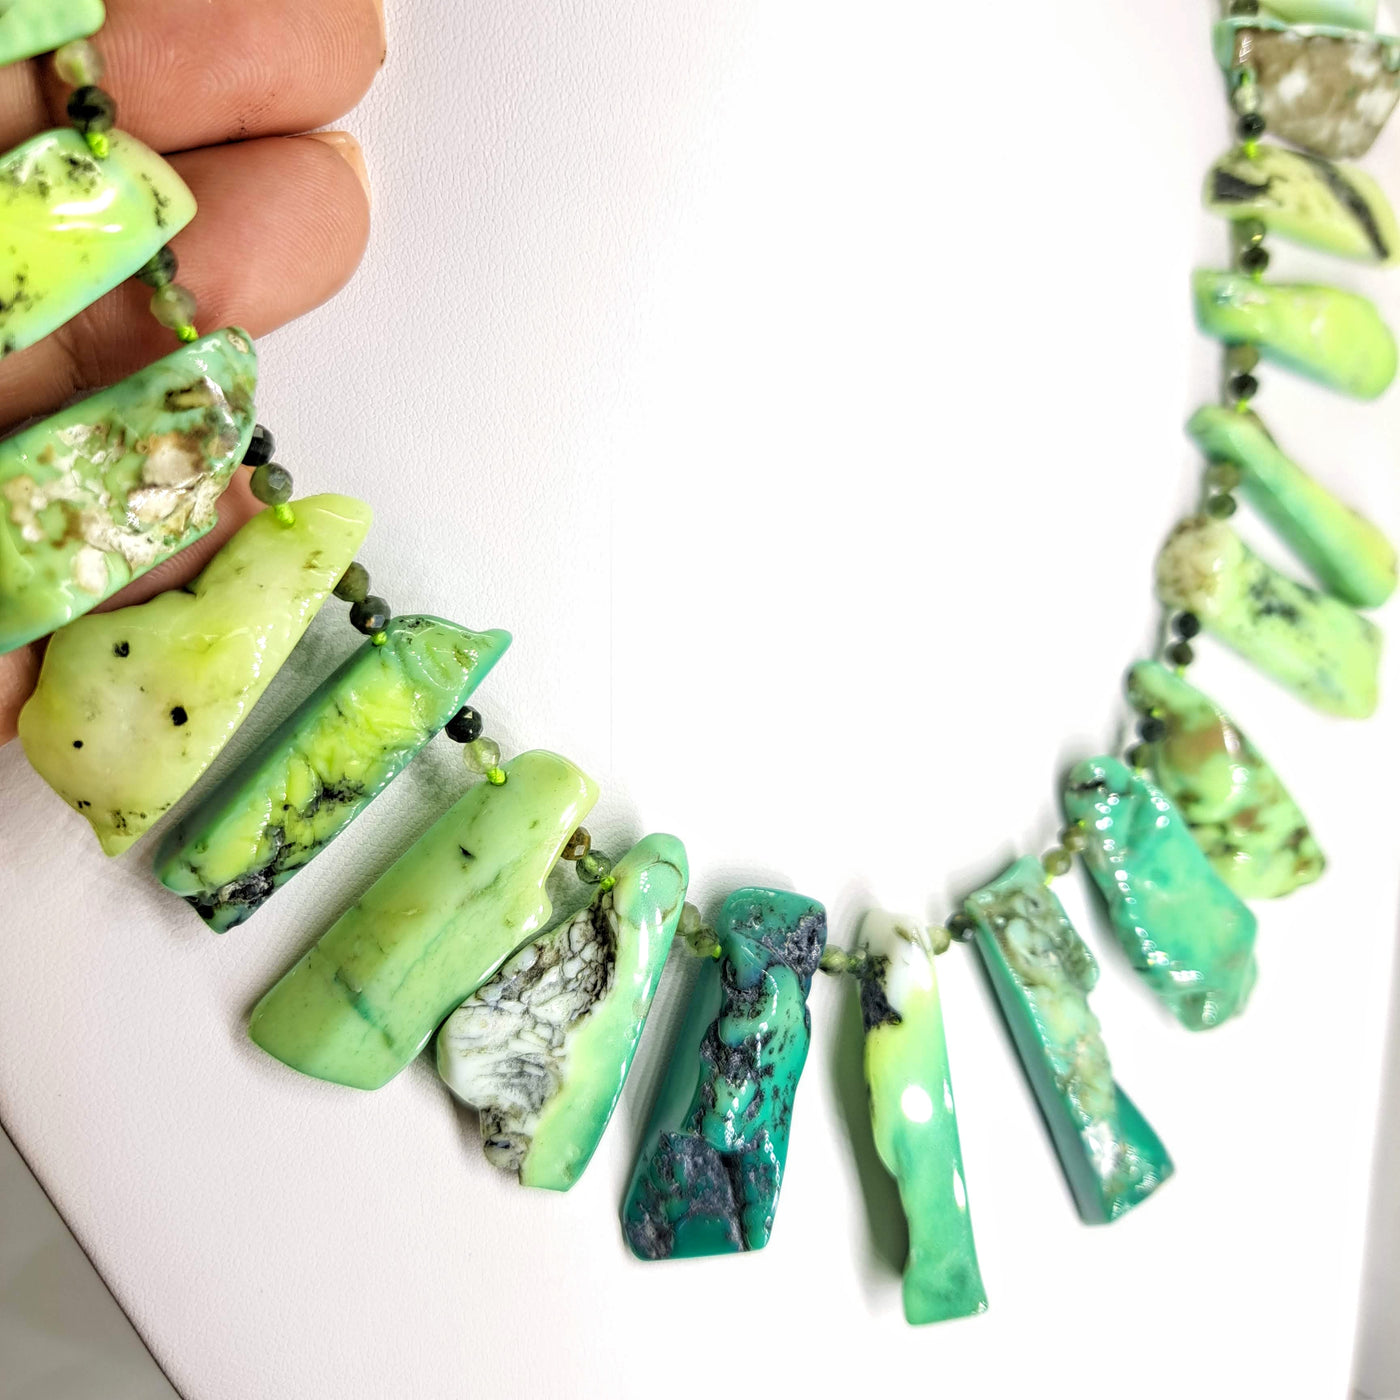 "Edge Of Greatness" 22" Necklace - Live-edge Chrysoprase, Decorative Clasp